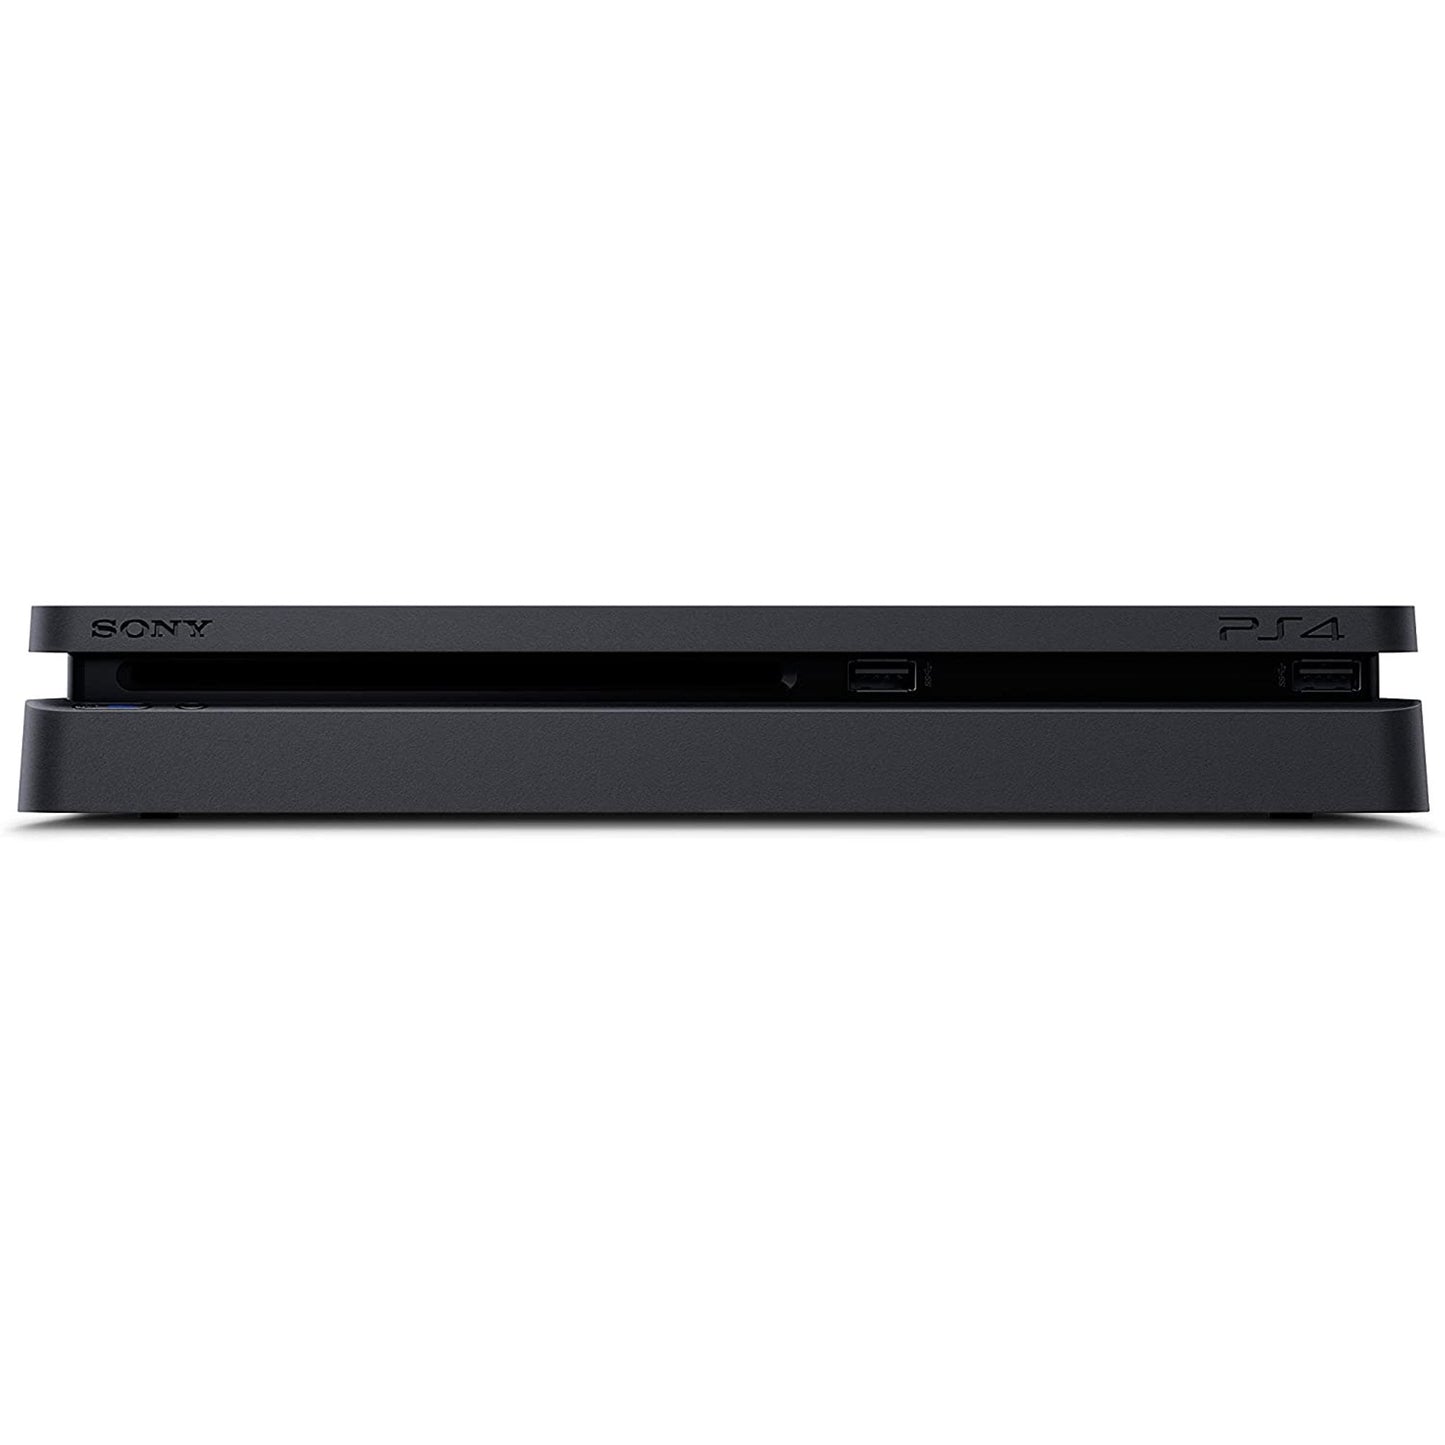 Sony Playstation PS4 1TB Black Console